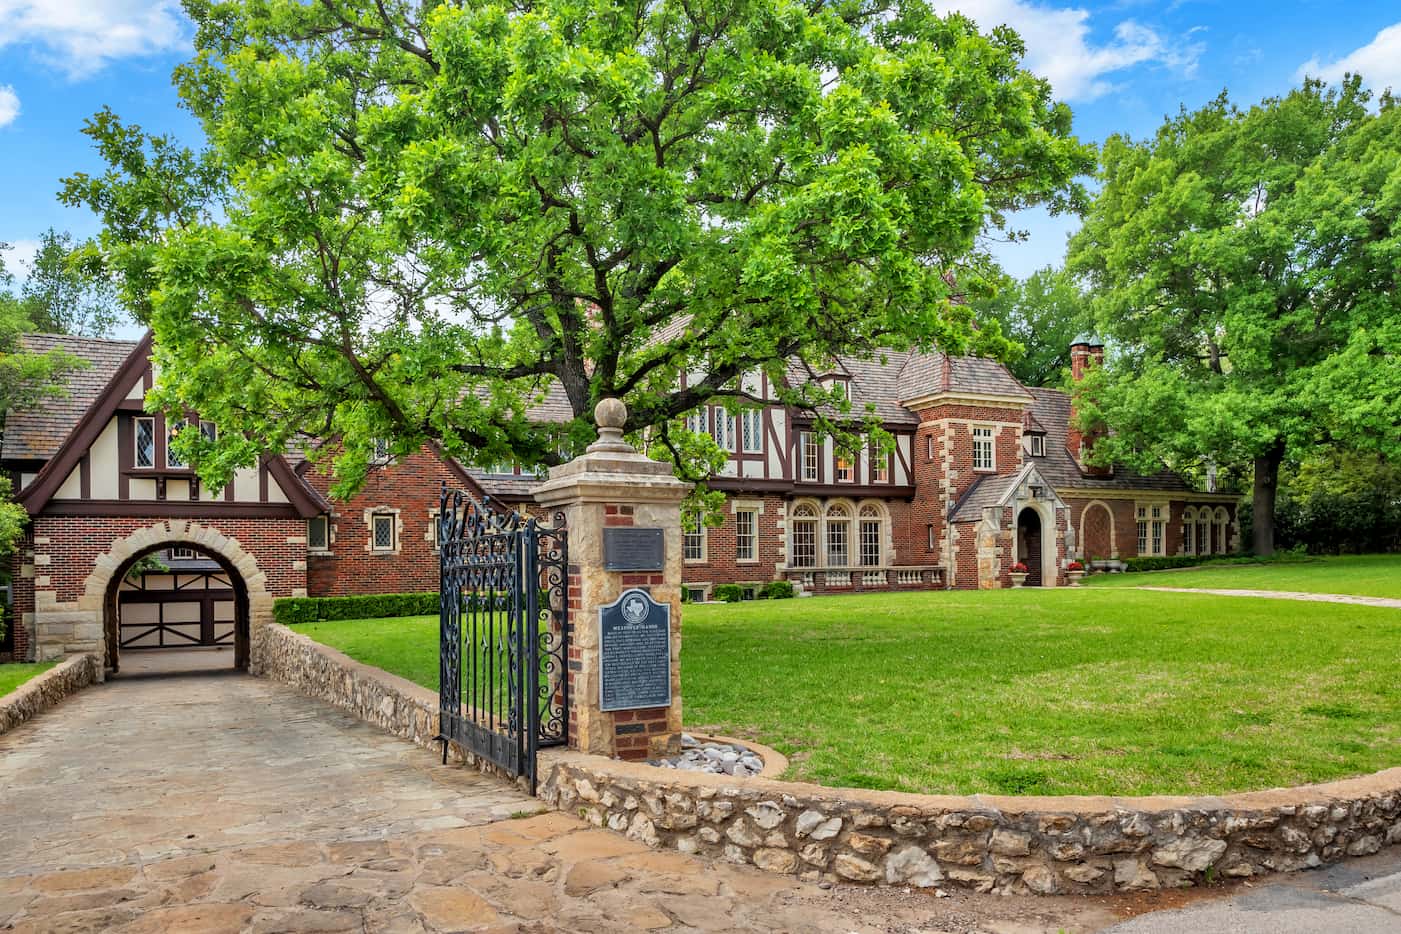 The entrance gate of a manor home is open and a plaque with historical information is...